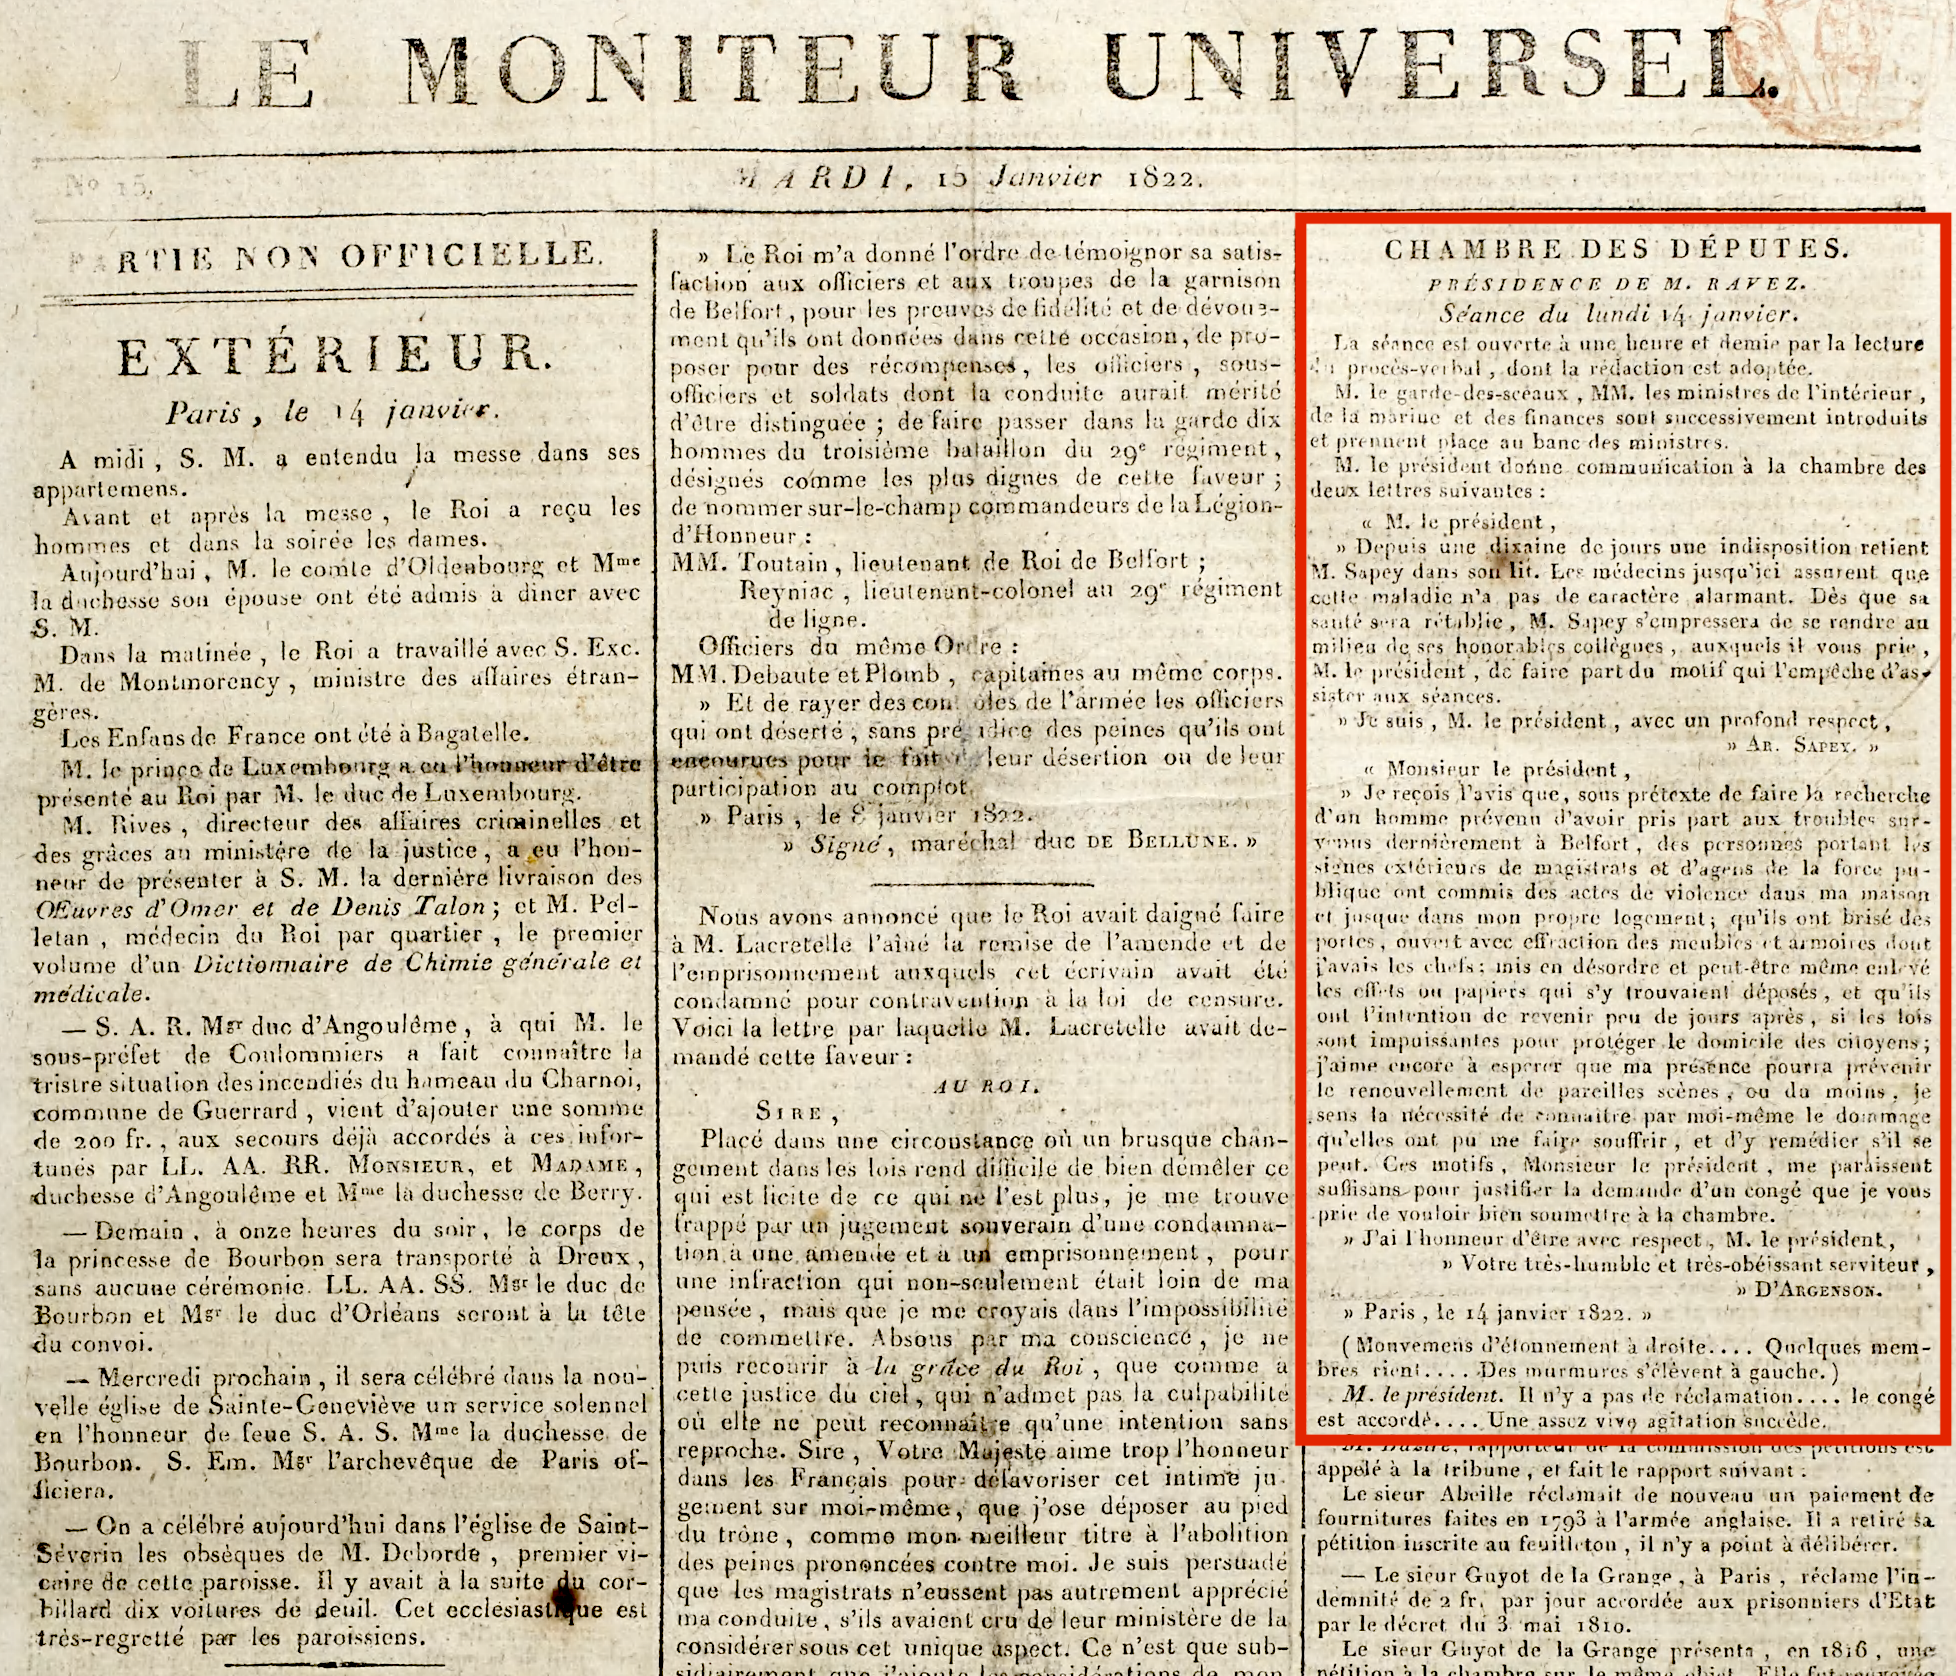 Image of the Jan. 15, 1822 edition of Le Moniteur Universel, with a highlighted article about a liberal deputy requesting leave to address the search of his house in a Carbonari investigation